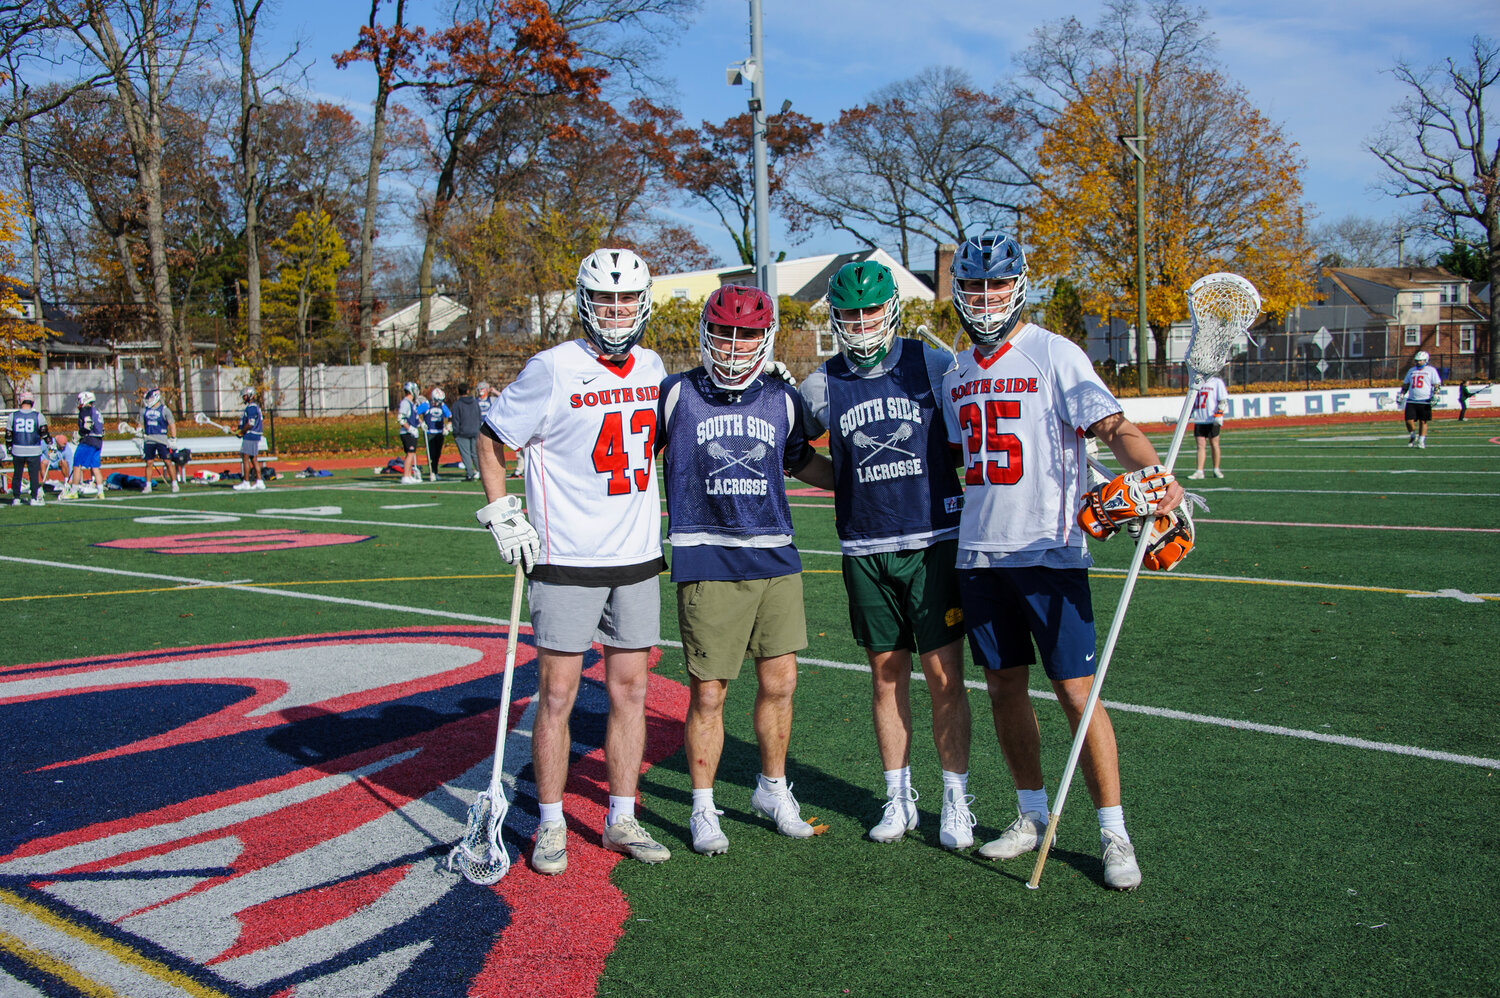 Liam Kassl, No. 43, Aidan Kelly, No. 22, Bobby Meindel, No. 44, and Joe LiCalzi, No. 25, catch up during the South Side alumni lacrosse game on Nov. 24.